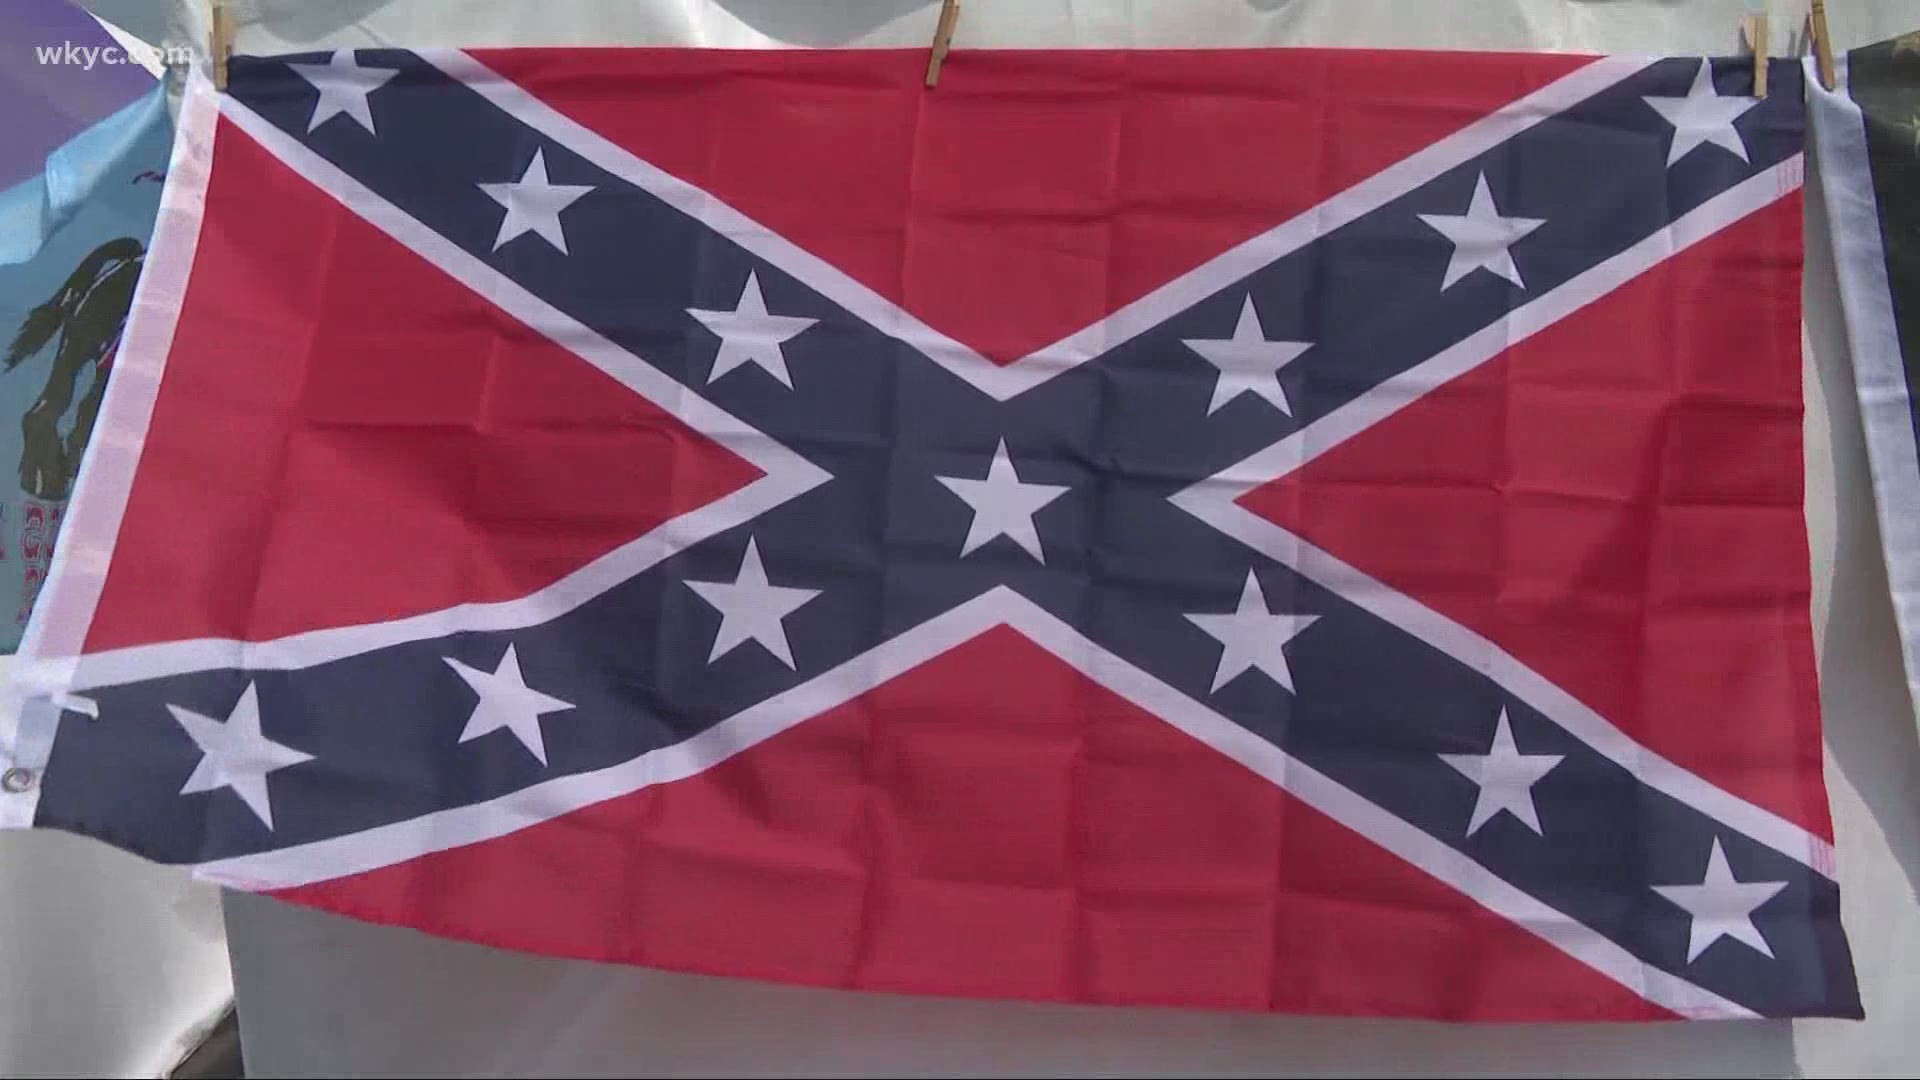 Brent is calling on the Lorain County Fair to ban confederate flags from the fairgrounds. She says the flag should be banned as a racist symbol.